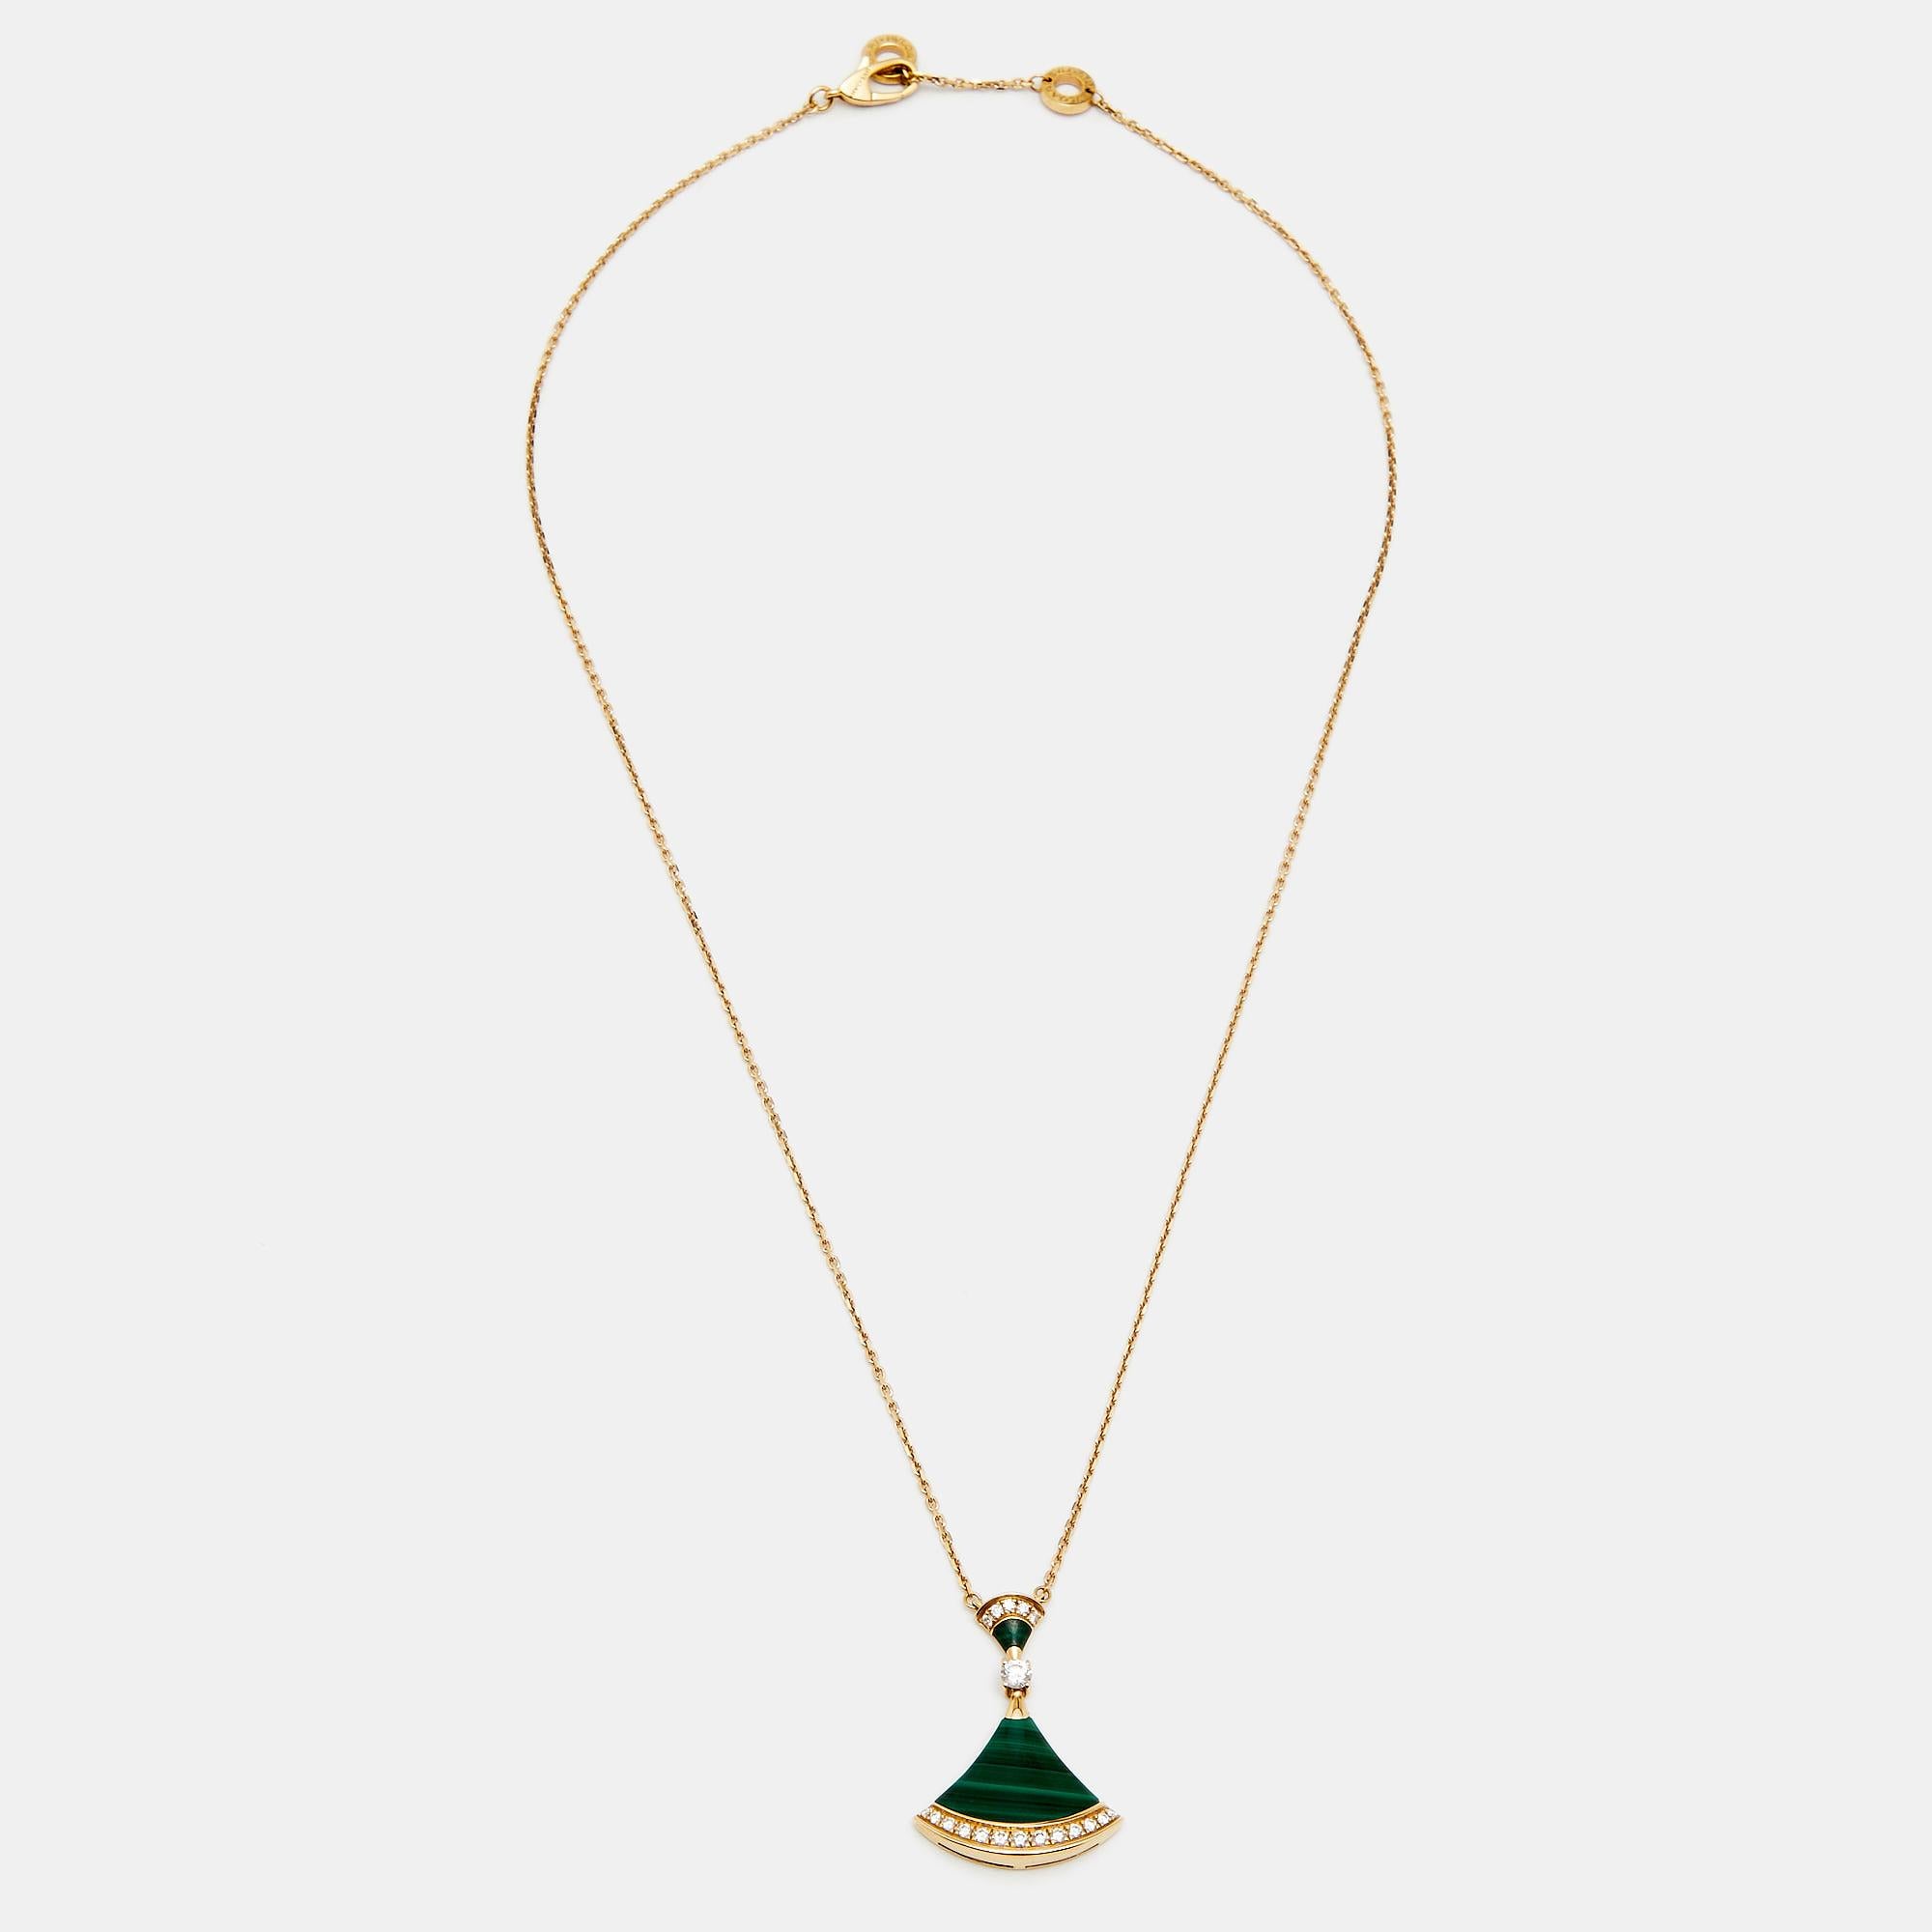 Truly meant for a diva like you, this Divas' Dream necklace is from Bvlgari. It has been magnificently crafted from 18k yellow gold and designed with a fan-shaped pendant that has diamonds and malachite. The piece has been finely sculpted to exalt